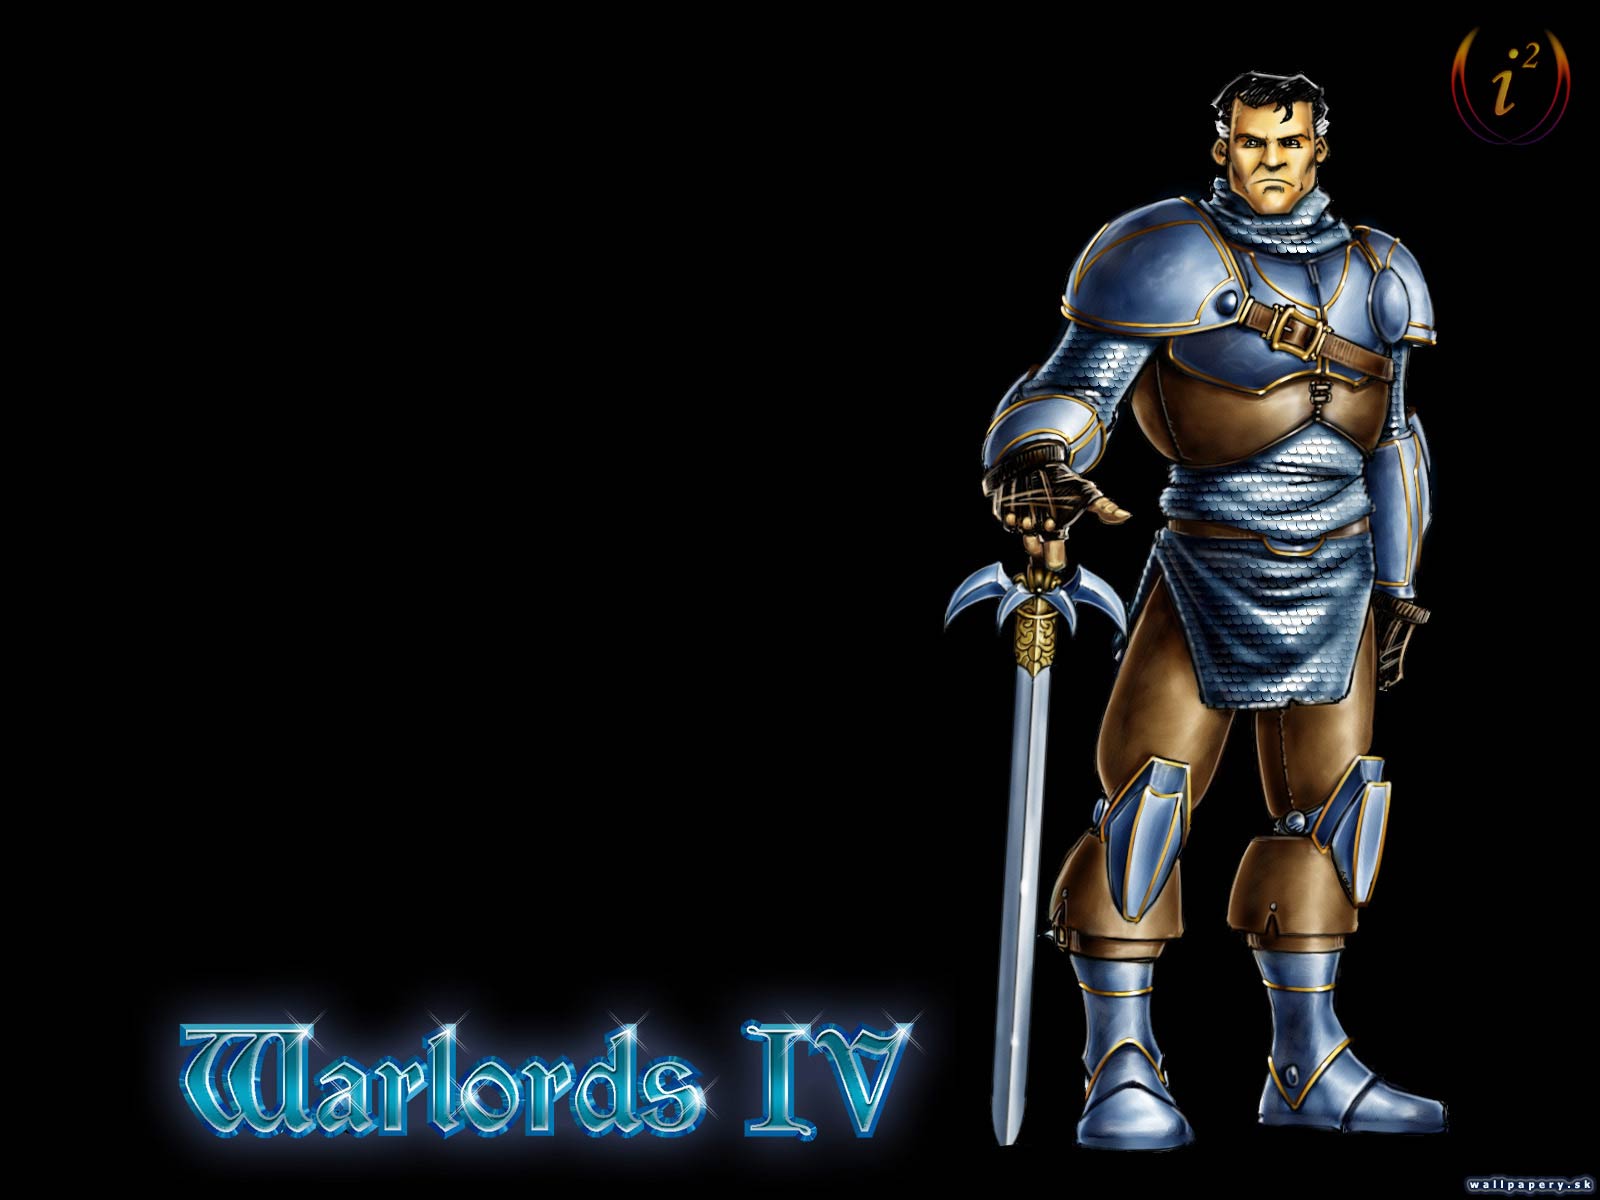 Warlords 4: Heroes of Etheria - wallpaper 2